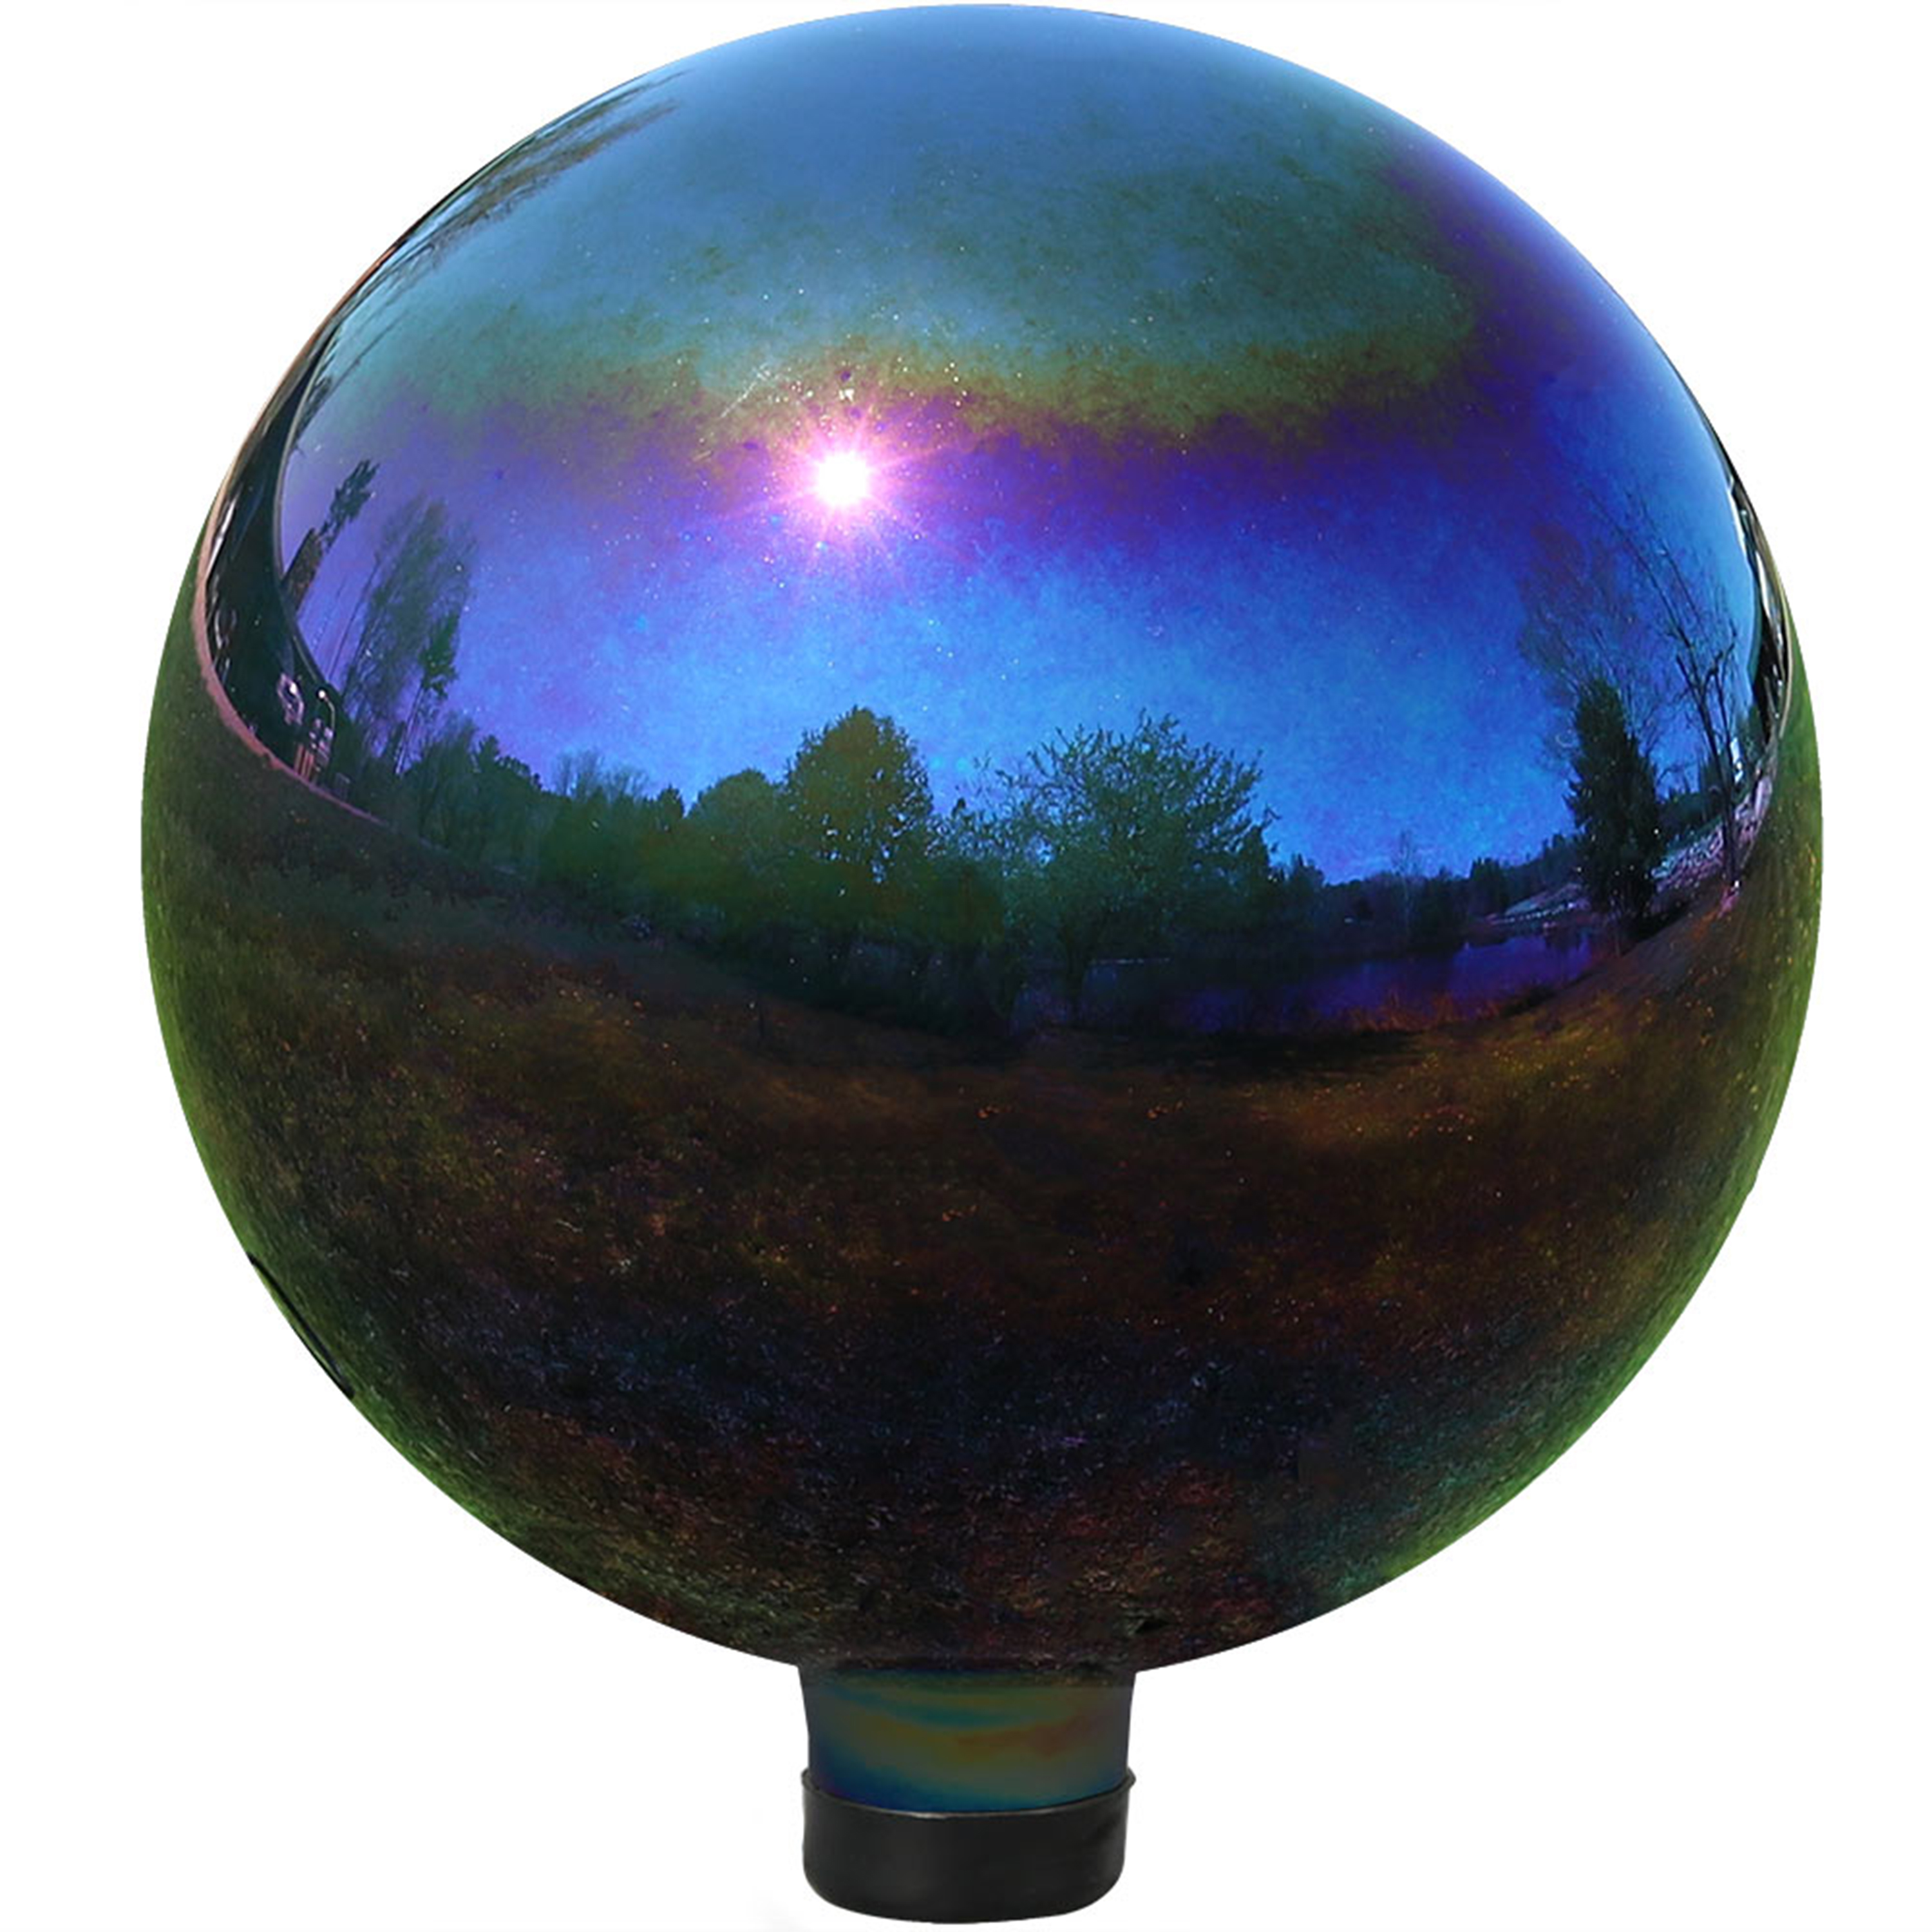 Sunnydaze 10-Inch Glass Gazing Globe Ball with Mirrored Finish, Color Options Available, Rainbow